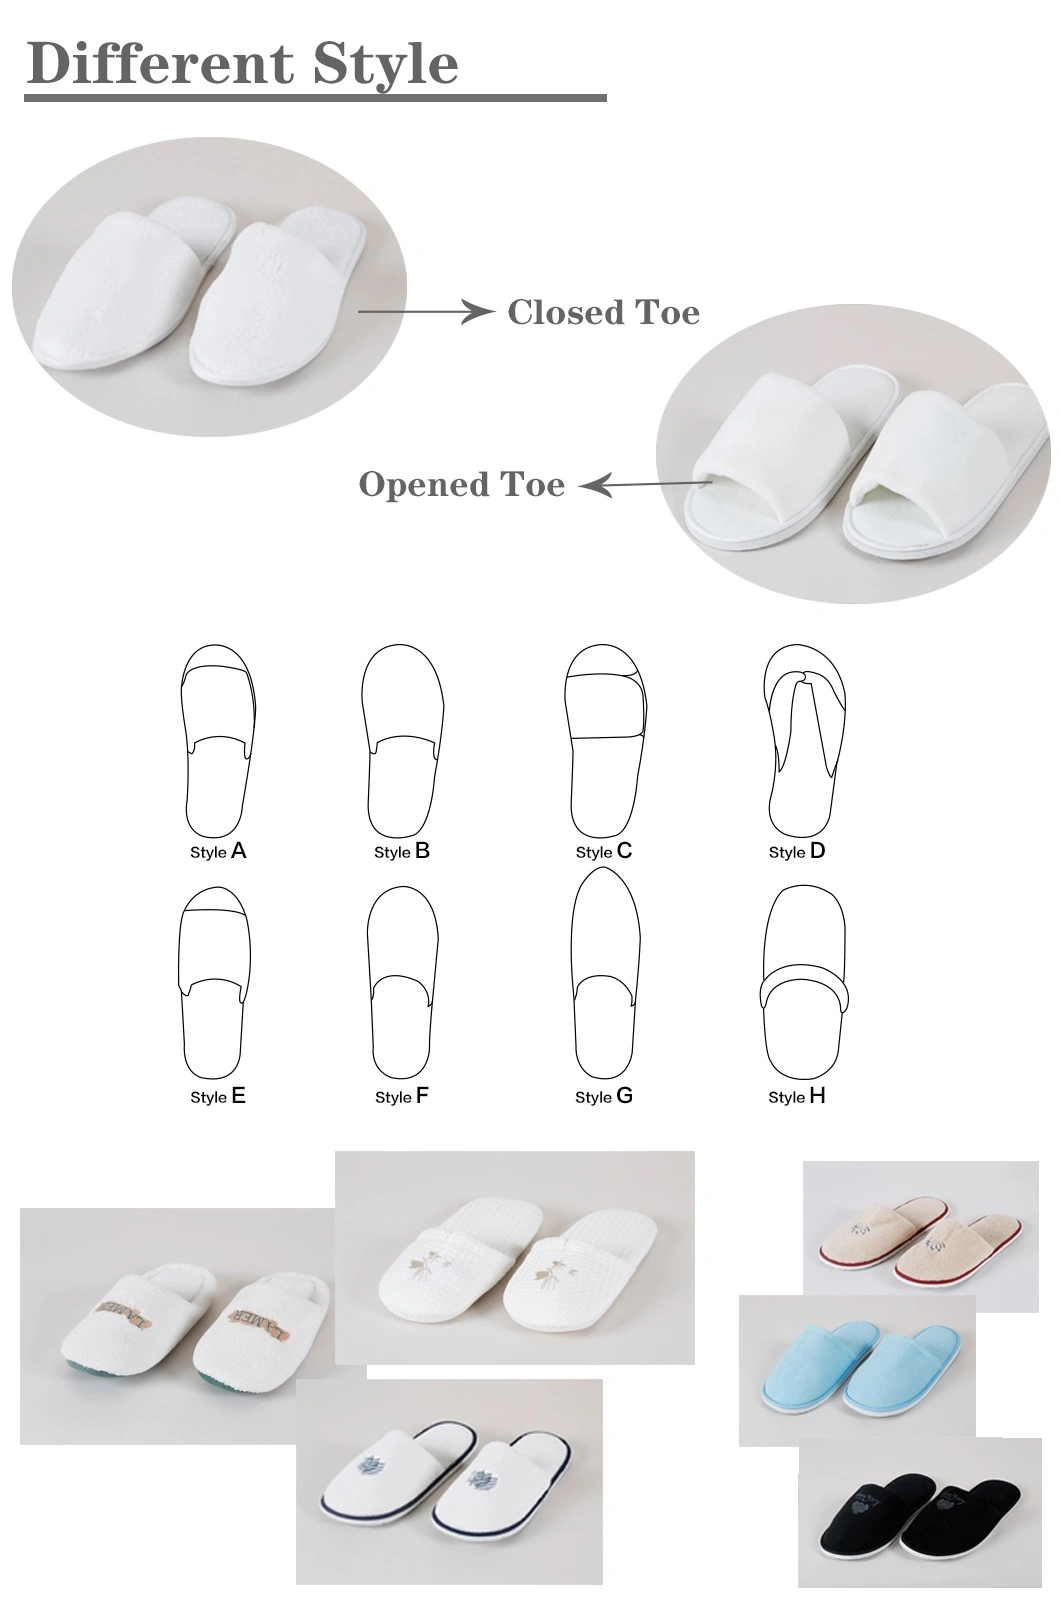 Hotel Washable Slipper Man Shoes High Quality Hotel Amenities Set/Fashionable Slipper for Hotel